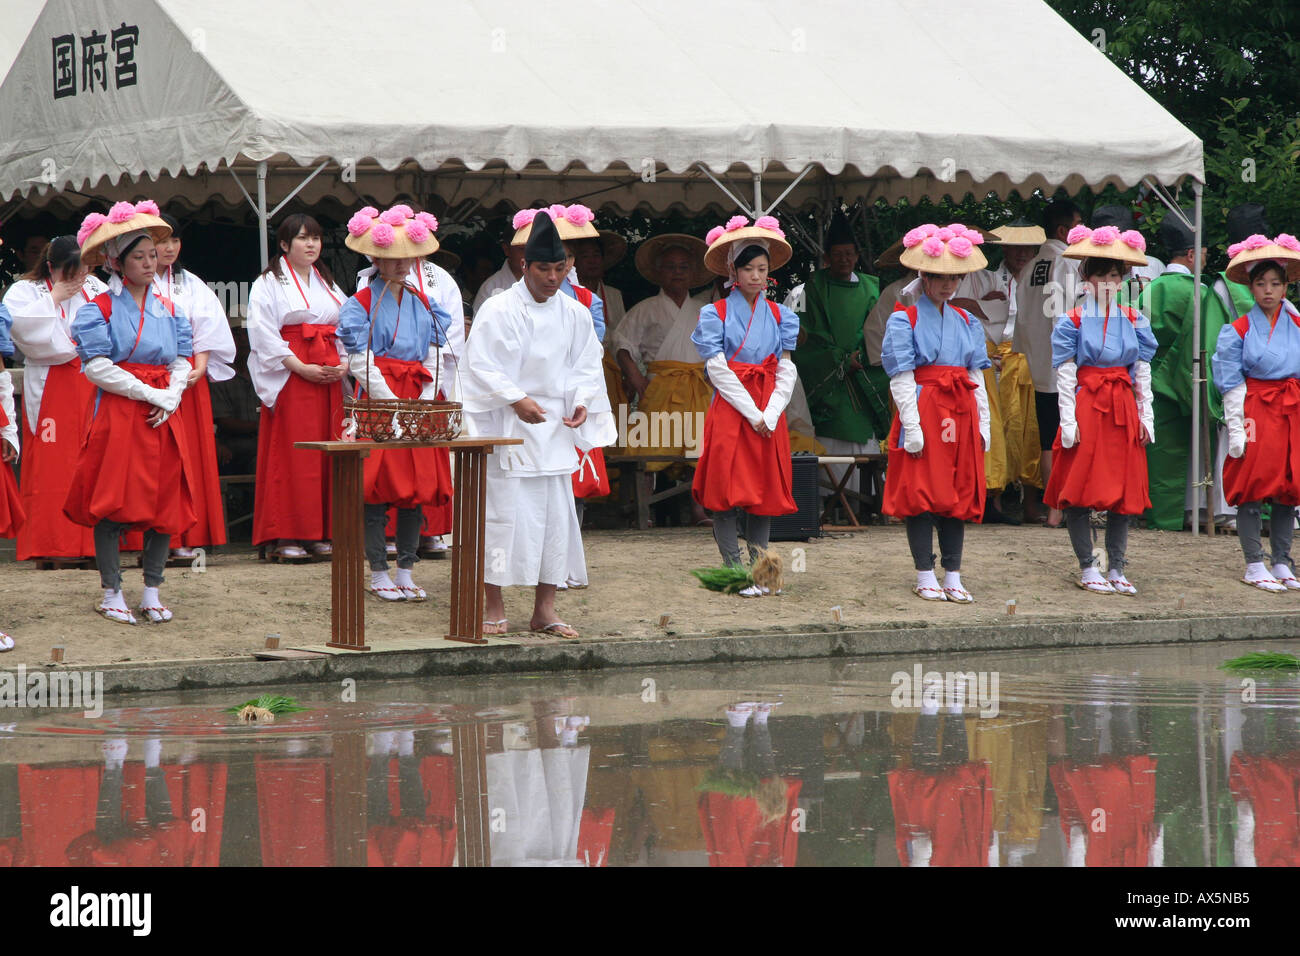 Traditional harvest festival ceremony at a rice field in Japan Stock Photo